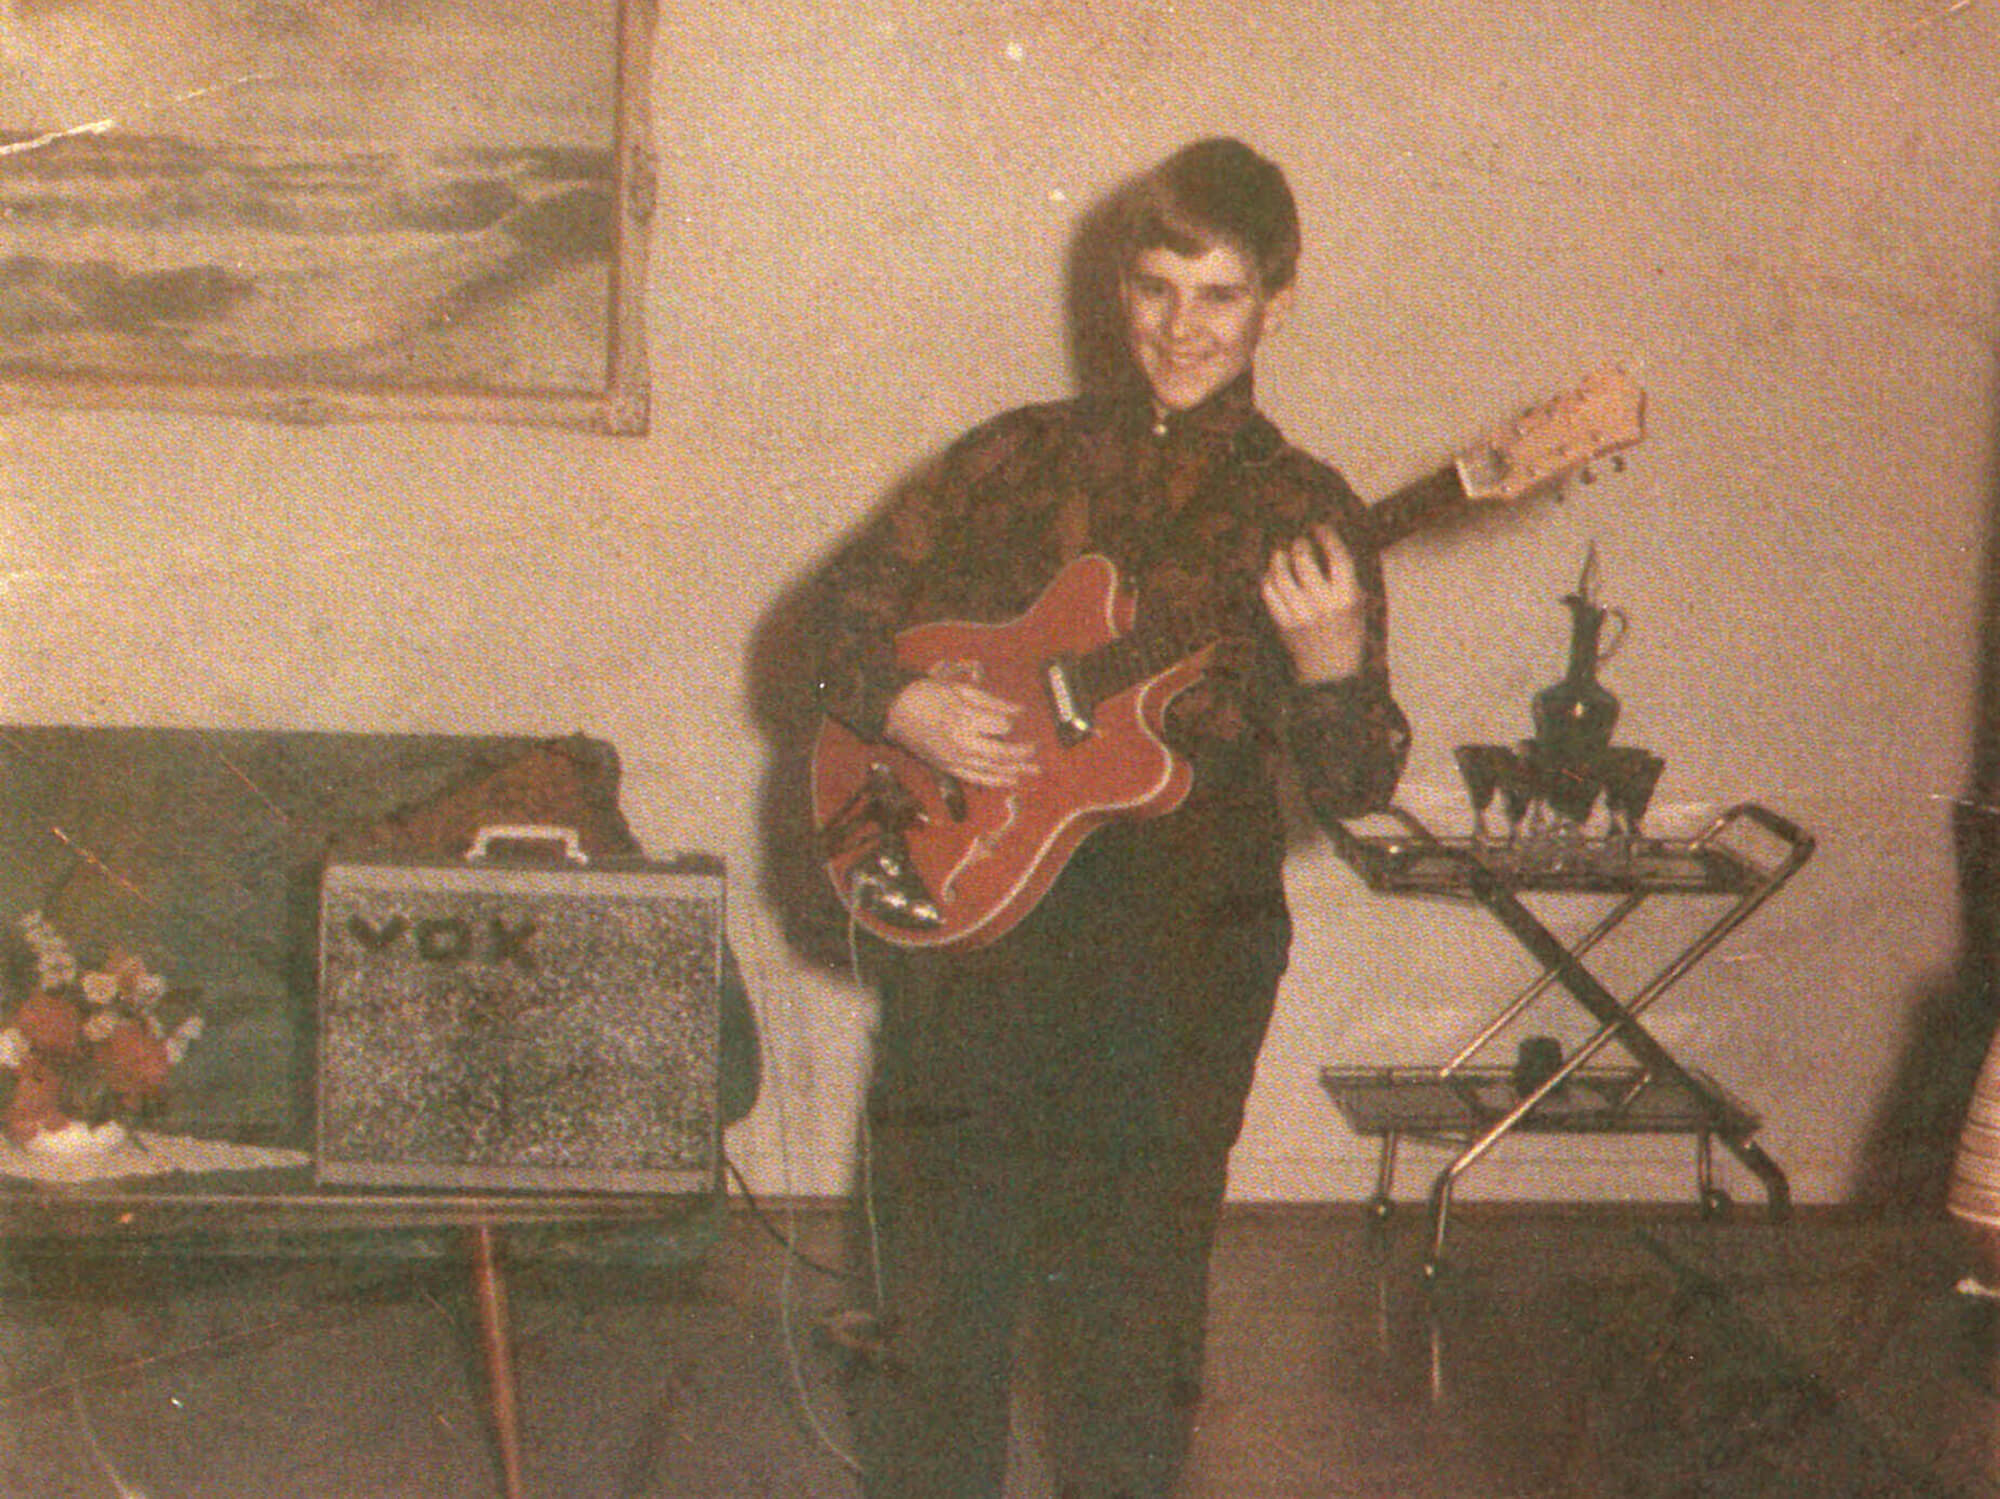 Alex Lifeson with his first guitar, the Canora